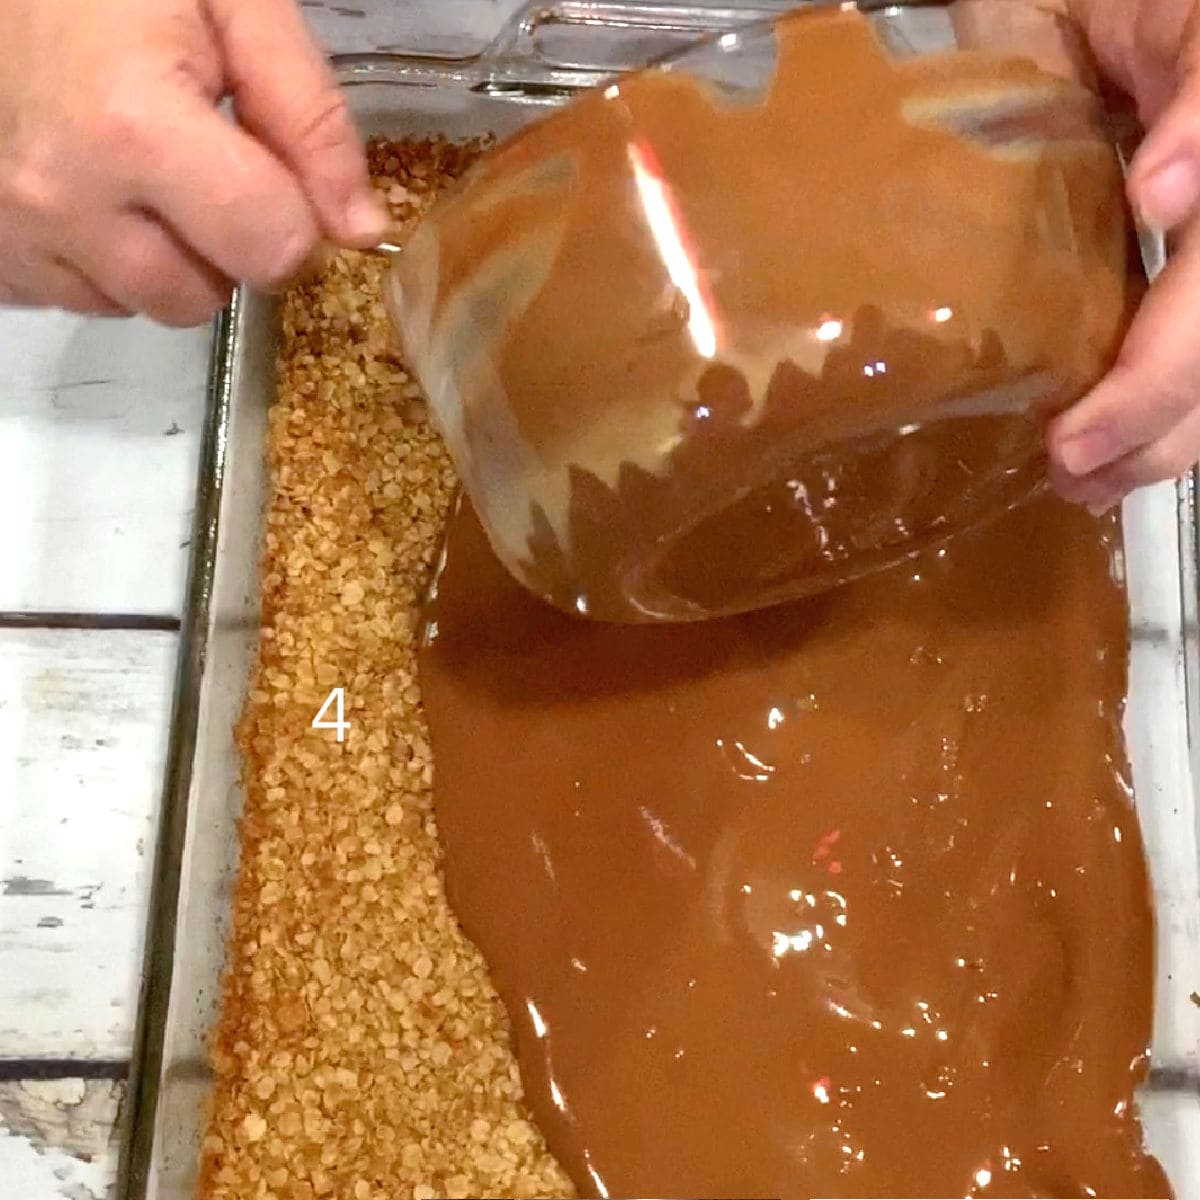 Pour melted chocolate and peanut butter onto the baked oatmeal layer.